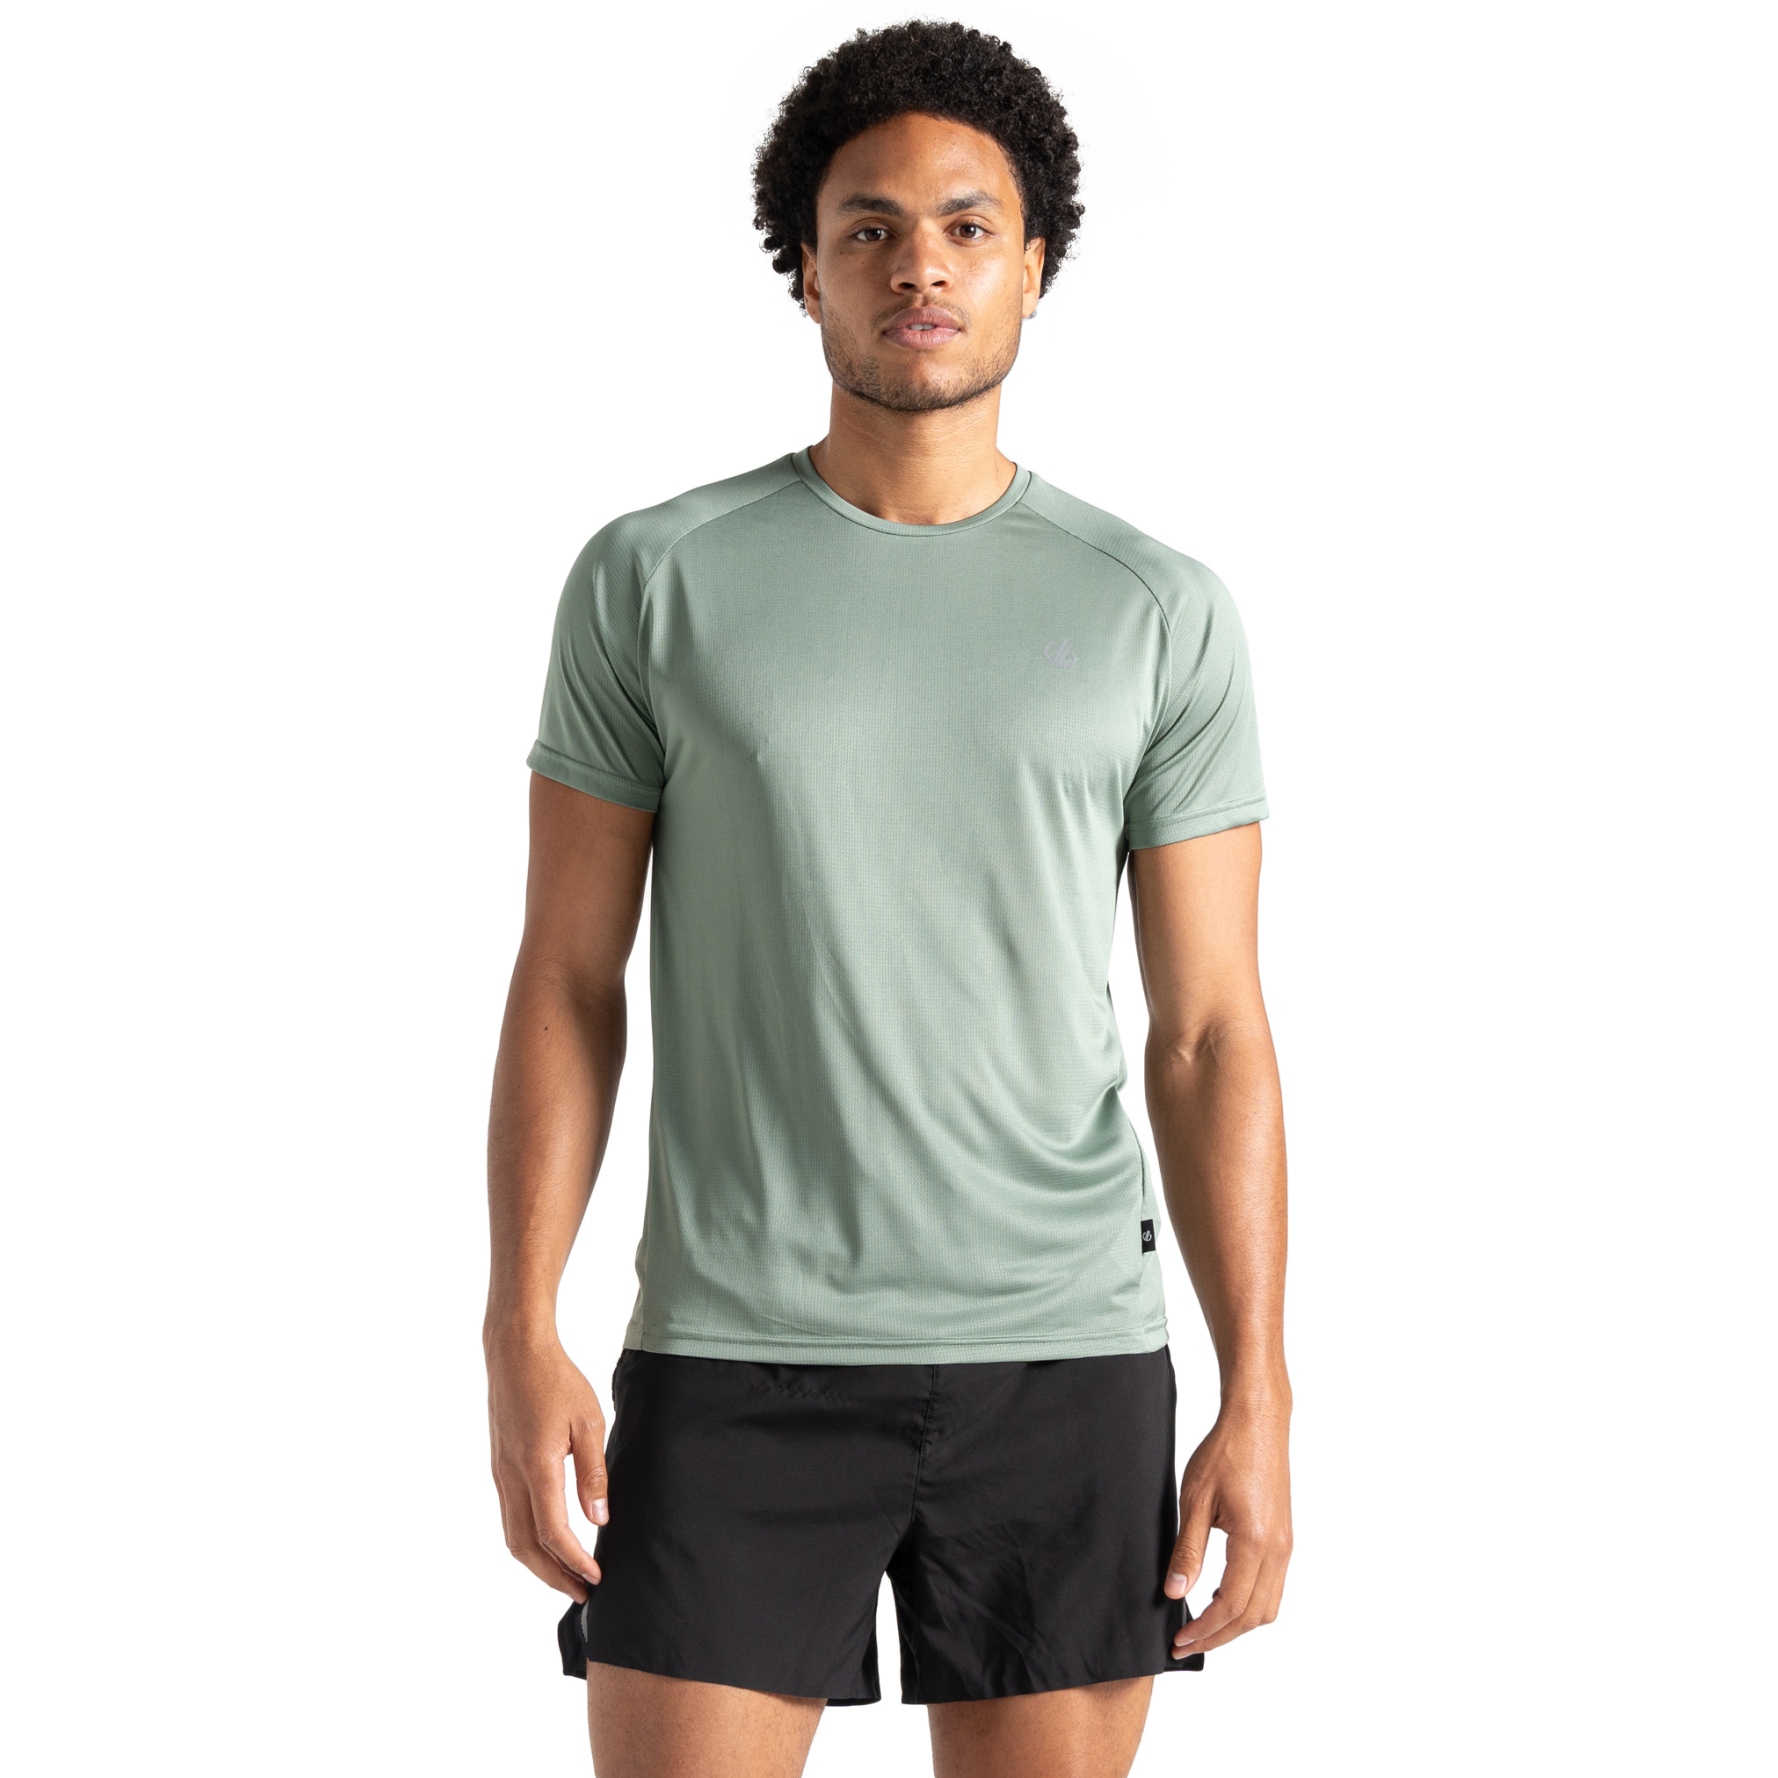 Picture of Dare 2b Accelerate Tee Men - RHI Lily Pad